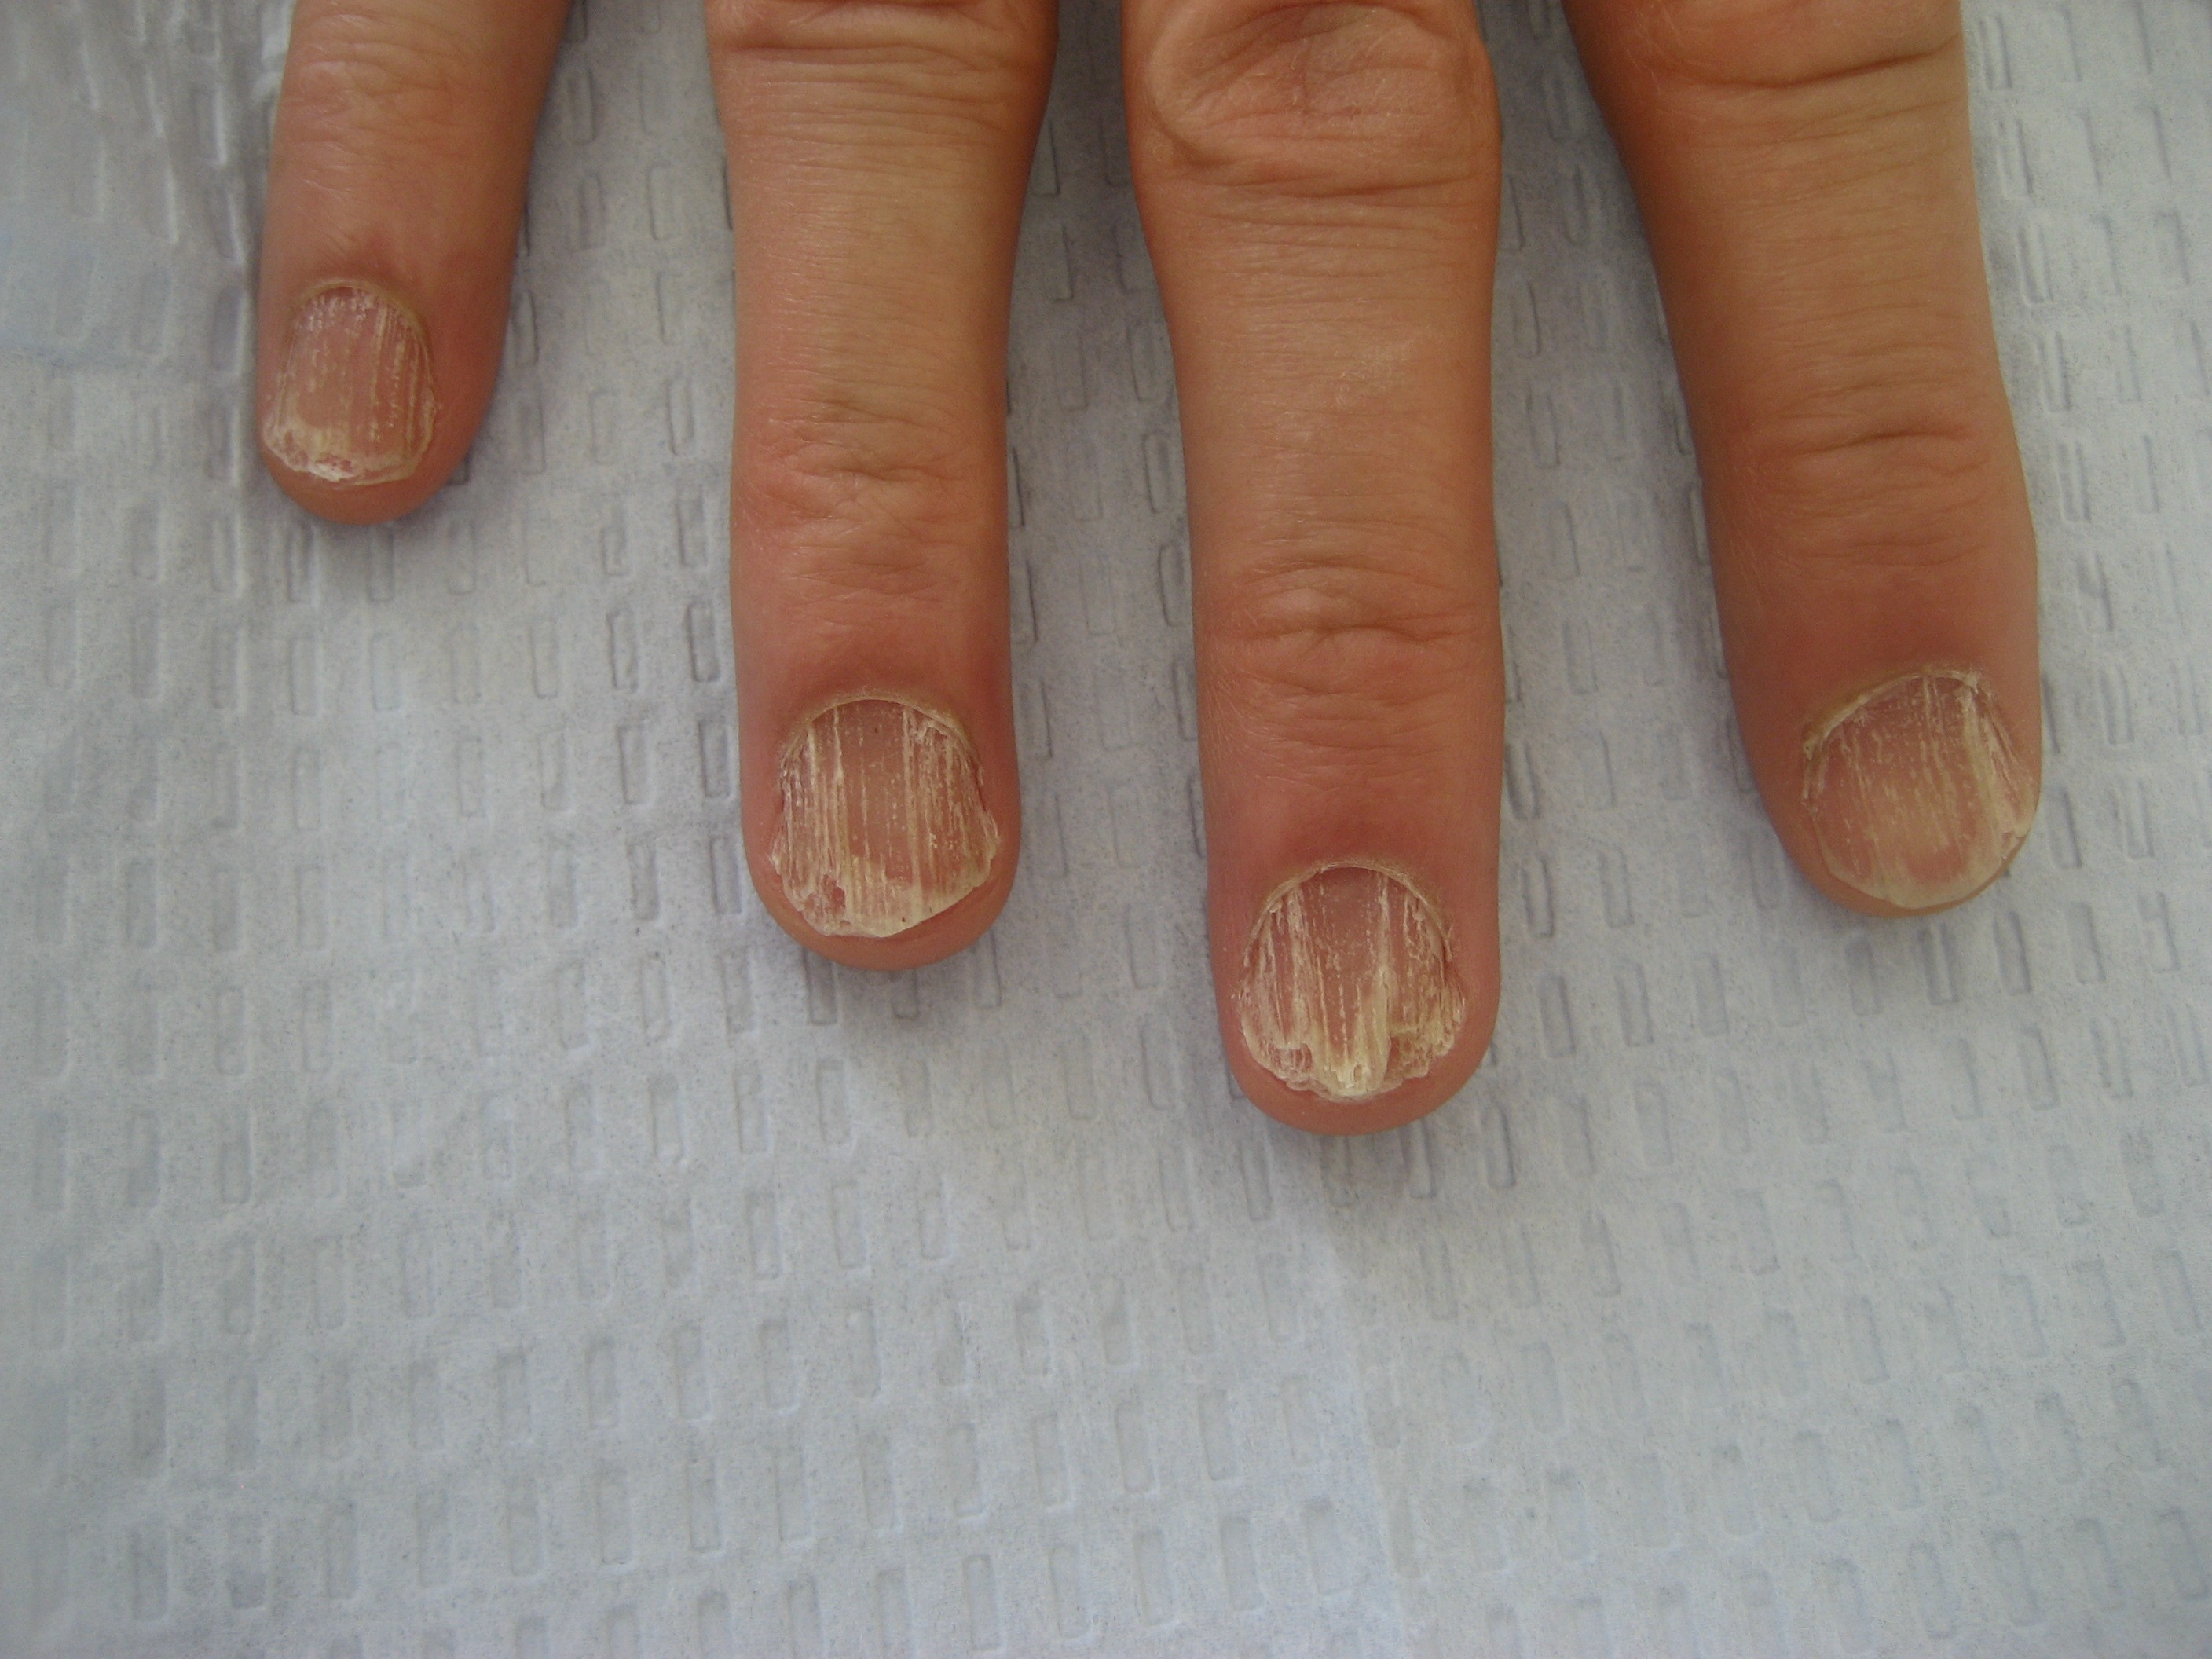 Top Nail Care Clinic Bangalore: Best Treatment for Discoloration